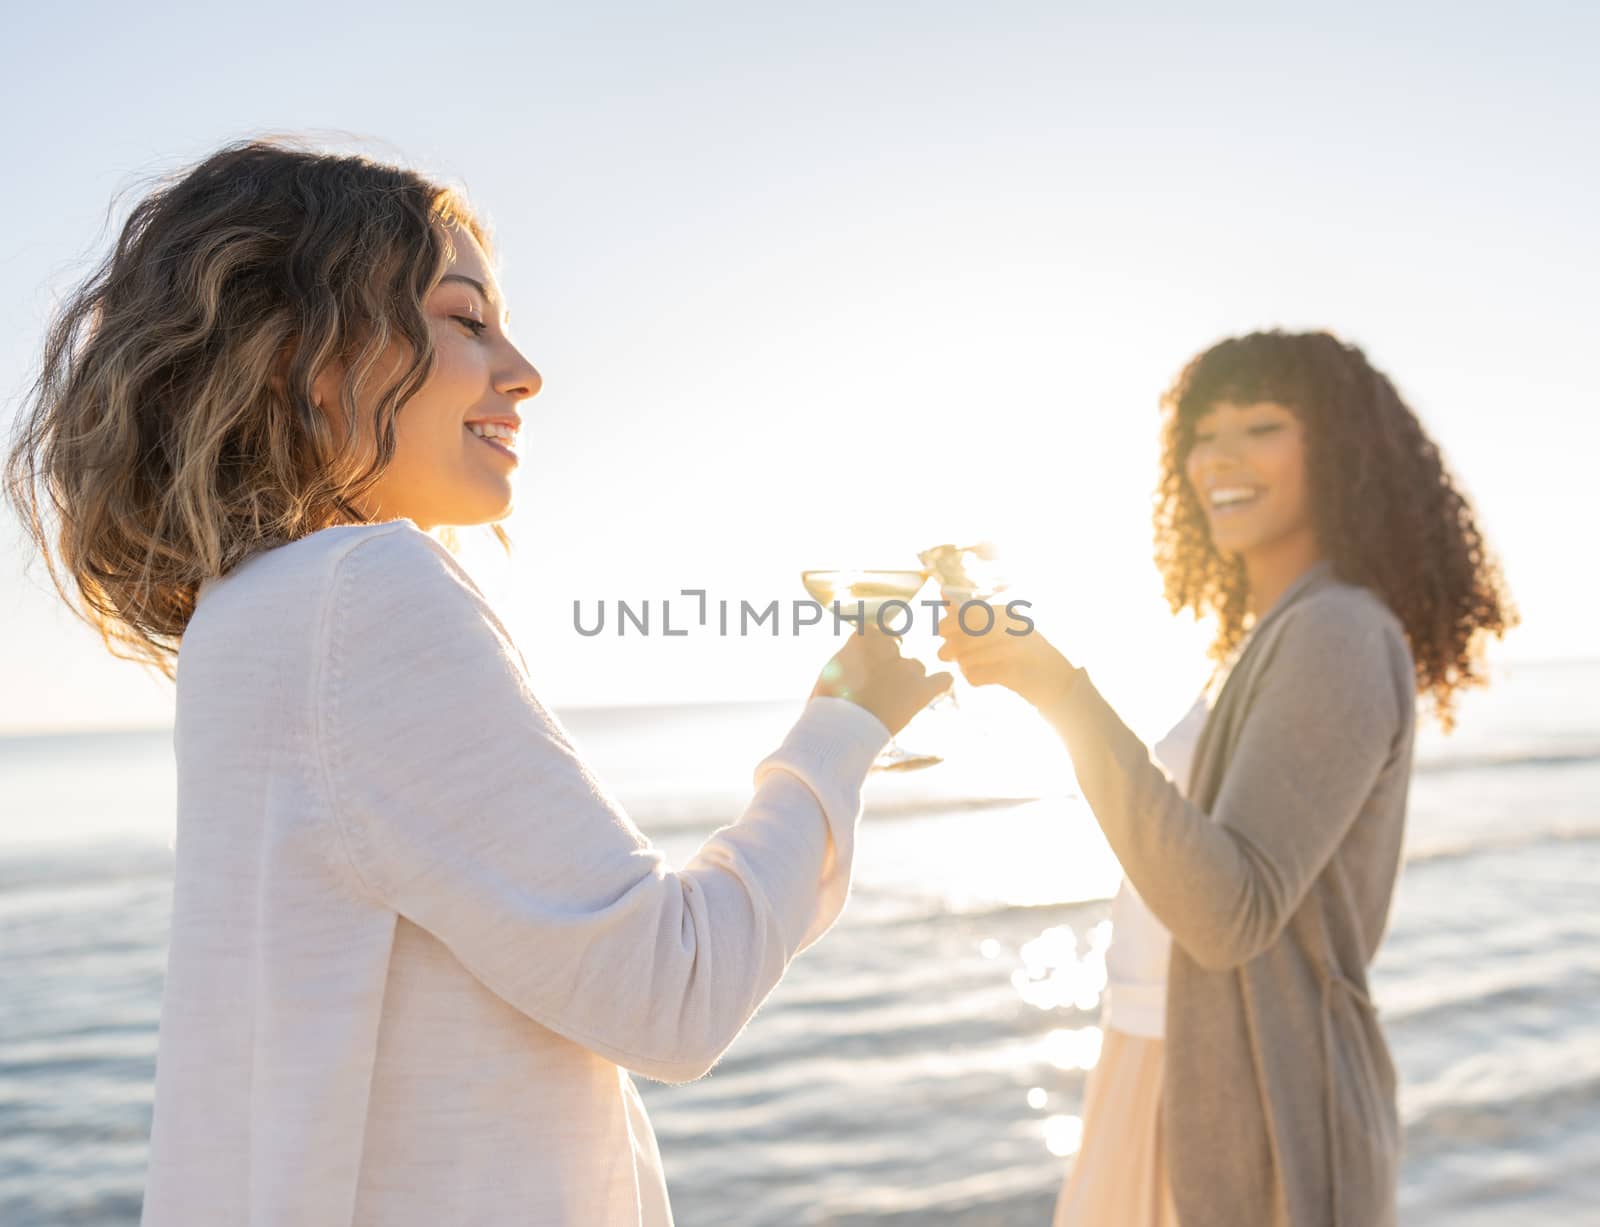 Glamour style photograph of two multiracial models, Caucasian and black Hispanic toasting with a glass of white wine by the seawater - Sunset or dawn picture of two women with focus on blonde hair by robbyfontanesi